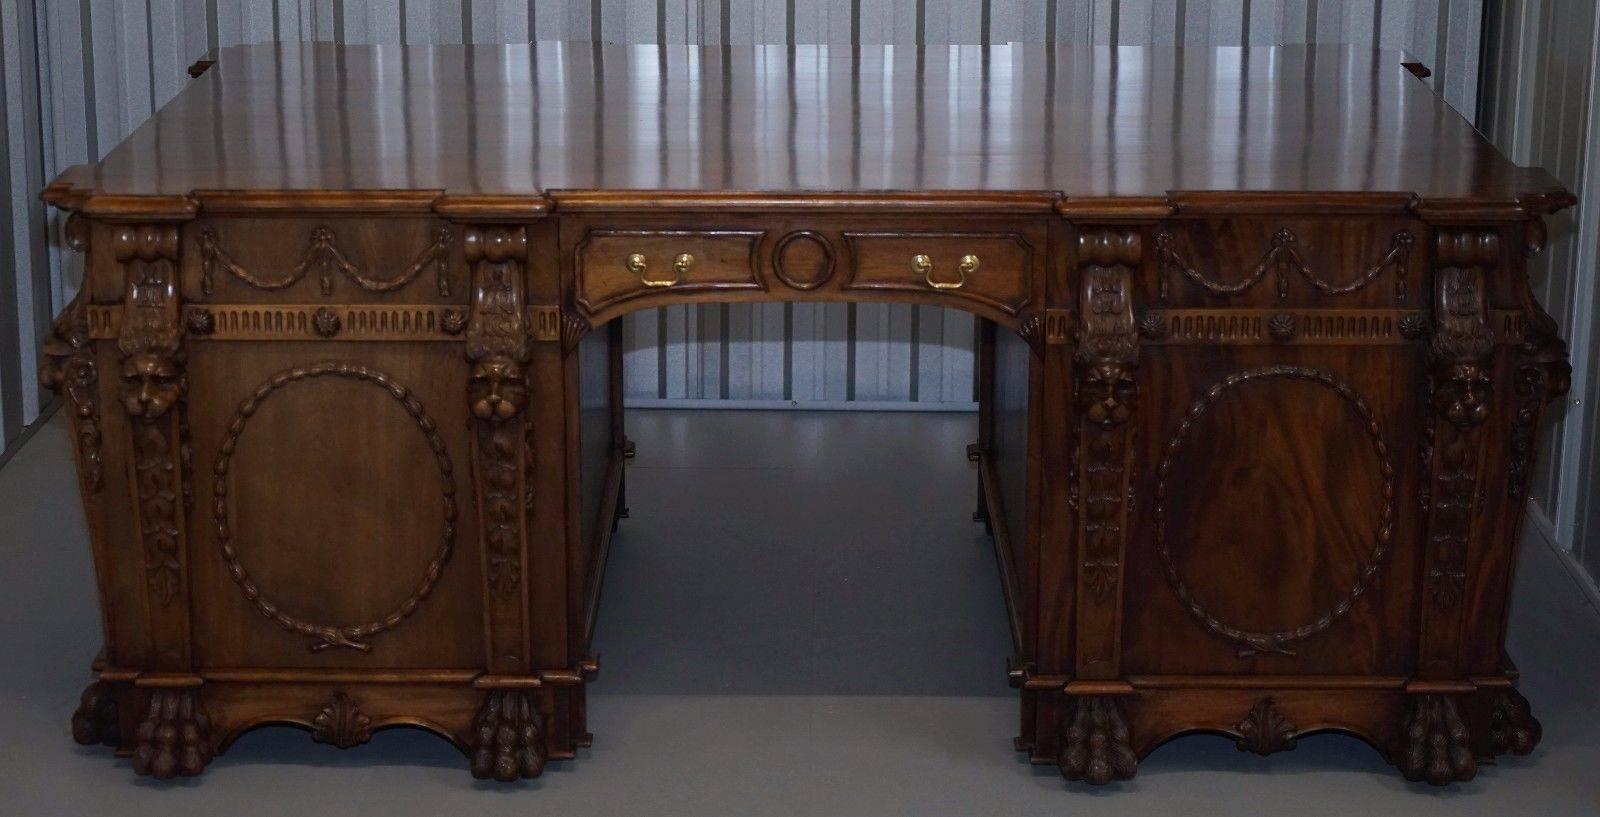 George III Victorian Pedestal Partner Desk Based on 1767 Thomas Chippendale Nostell Priory